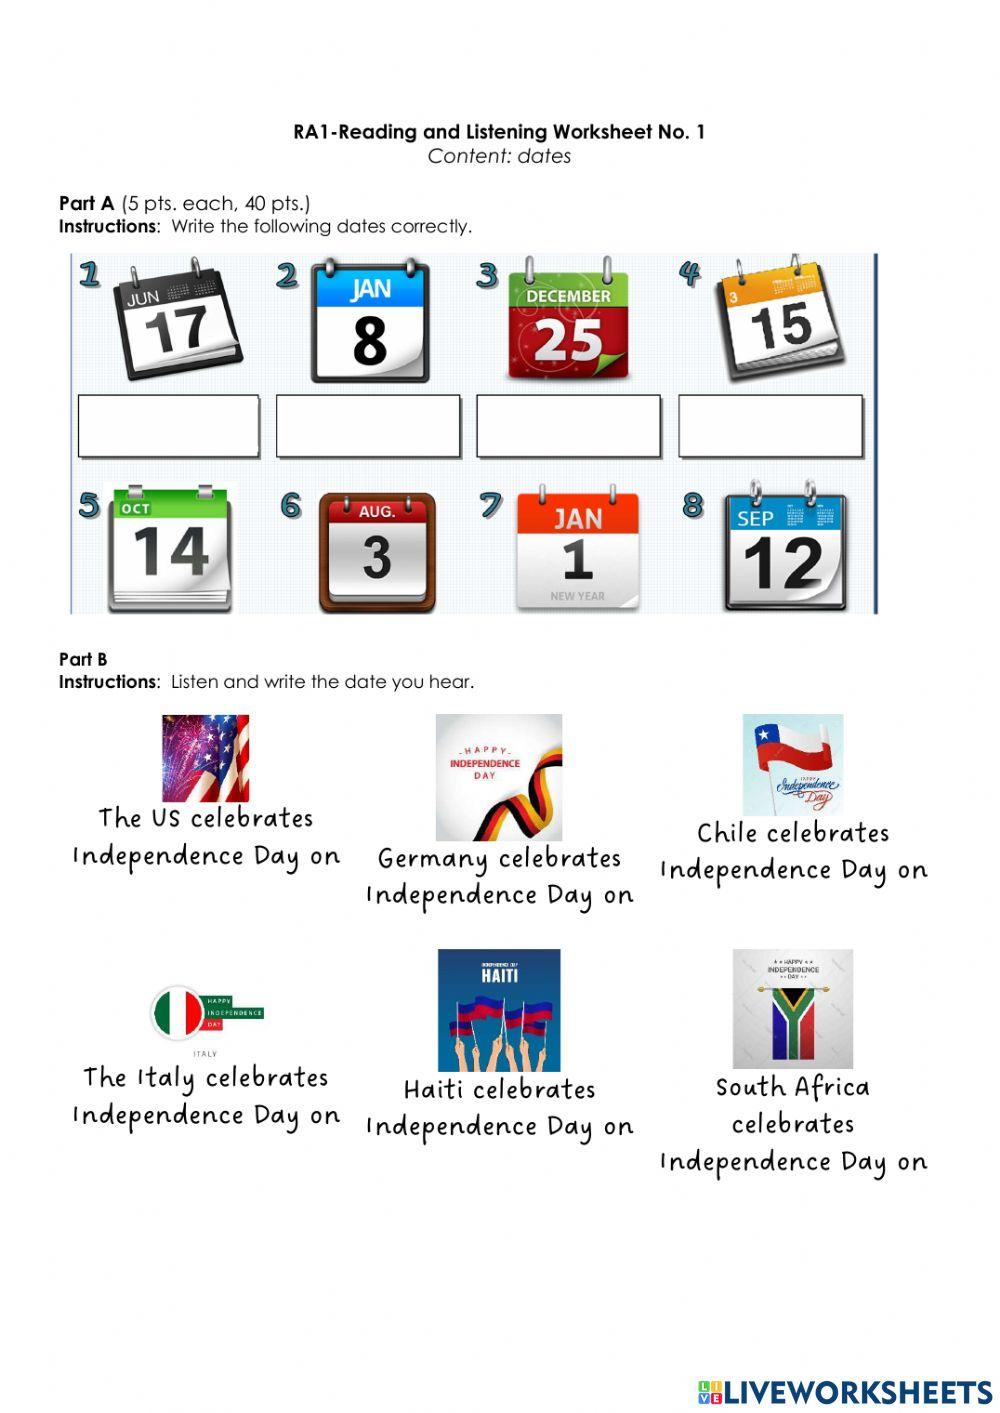 Listening and Writing Dates-American English